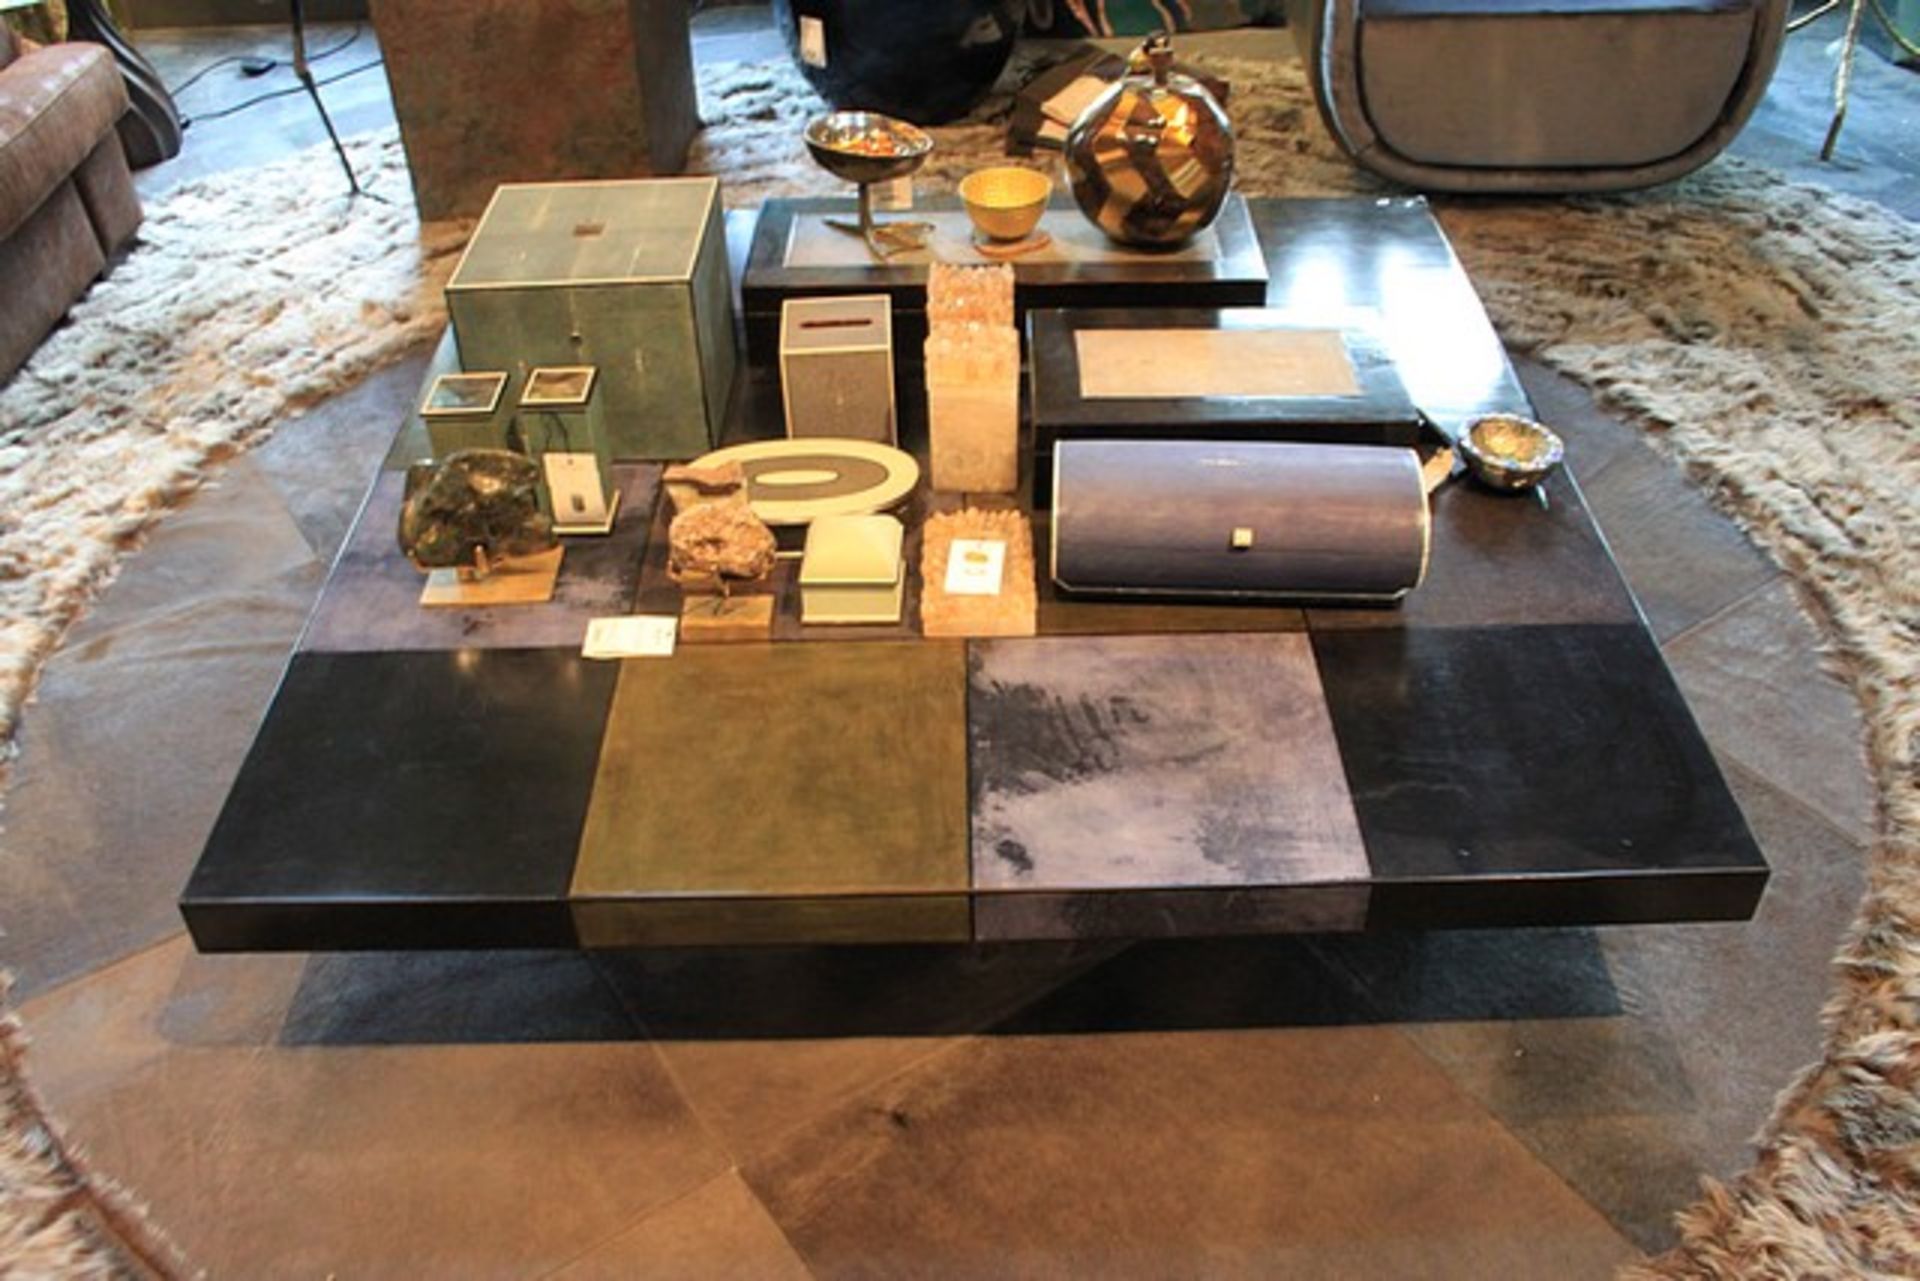 Coffee table pairing an amalgamation of the finest materials with an eye catching sculptural form, - Image 2 of 2